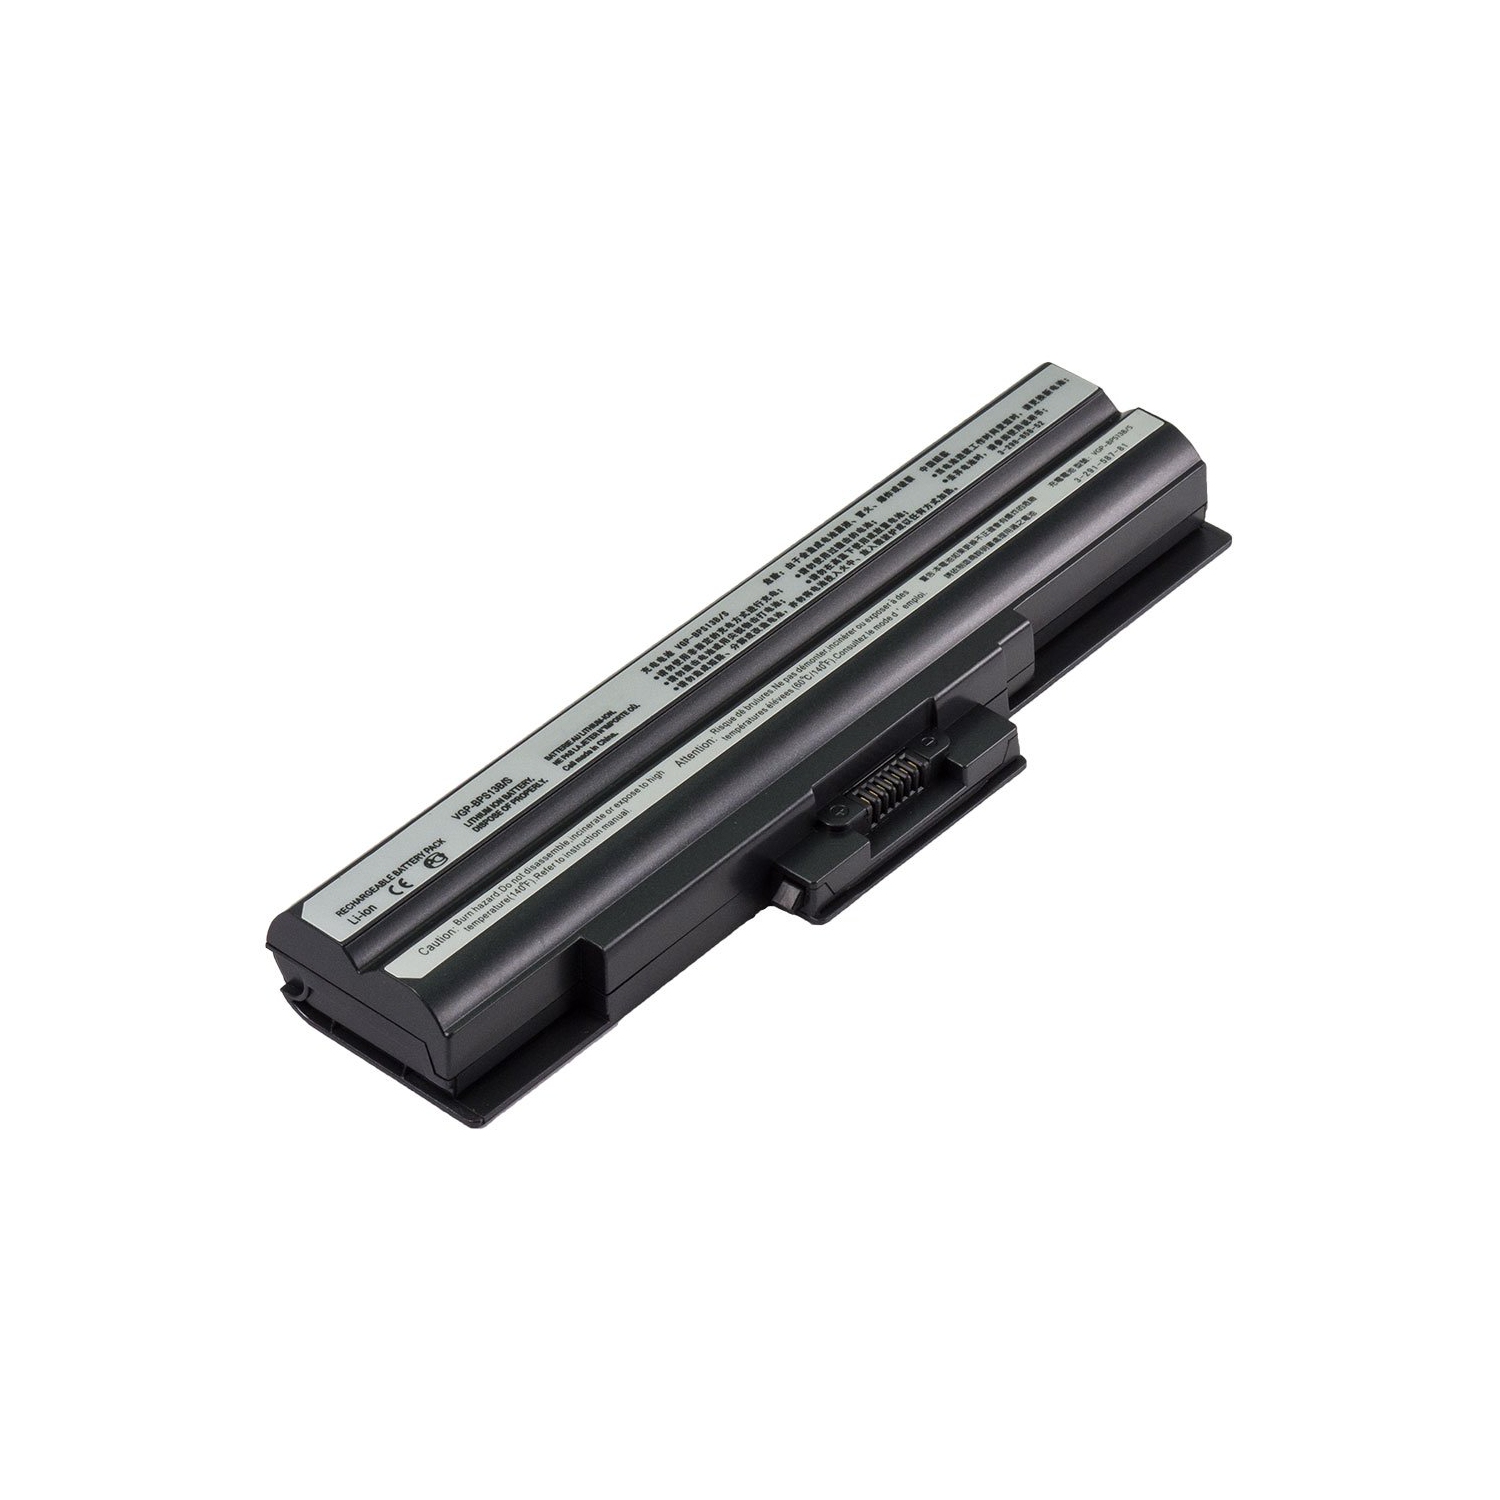 Laptop Battery Replacement for Sony VAIO VGN-AW120J/H, VGP-BPS13, VGP-BPS13/S, VGP-BPS13A/Q, VGP-BPS13B/B, VGP-BSP13/S